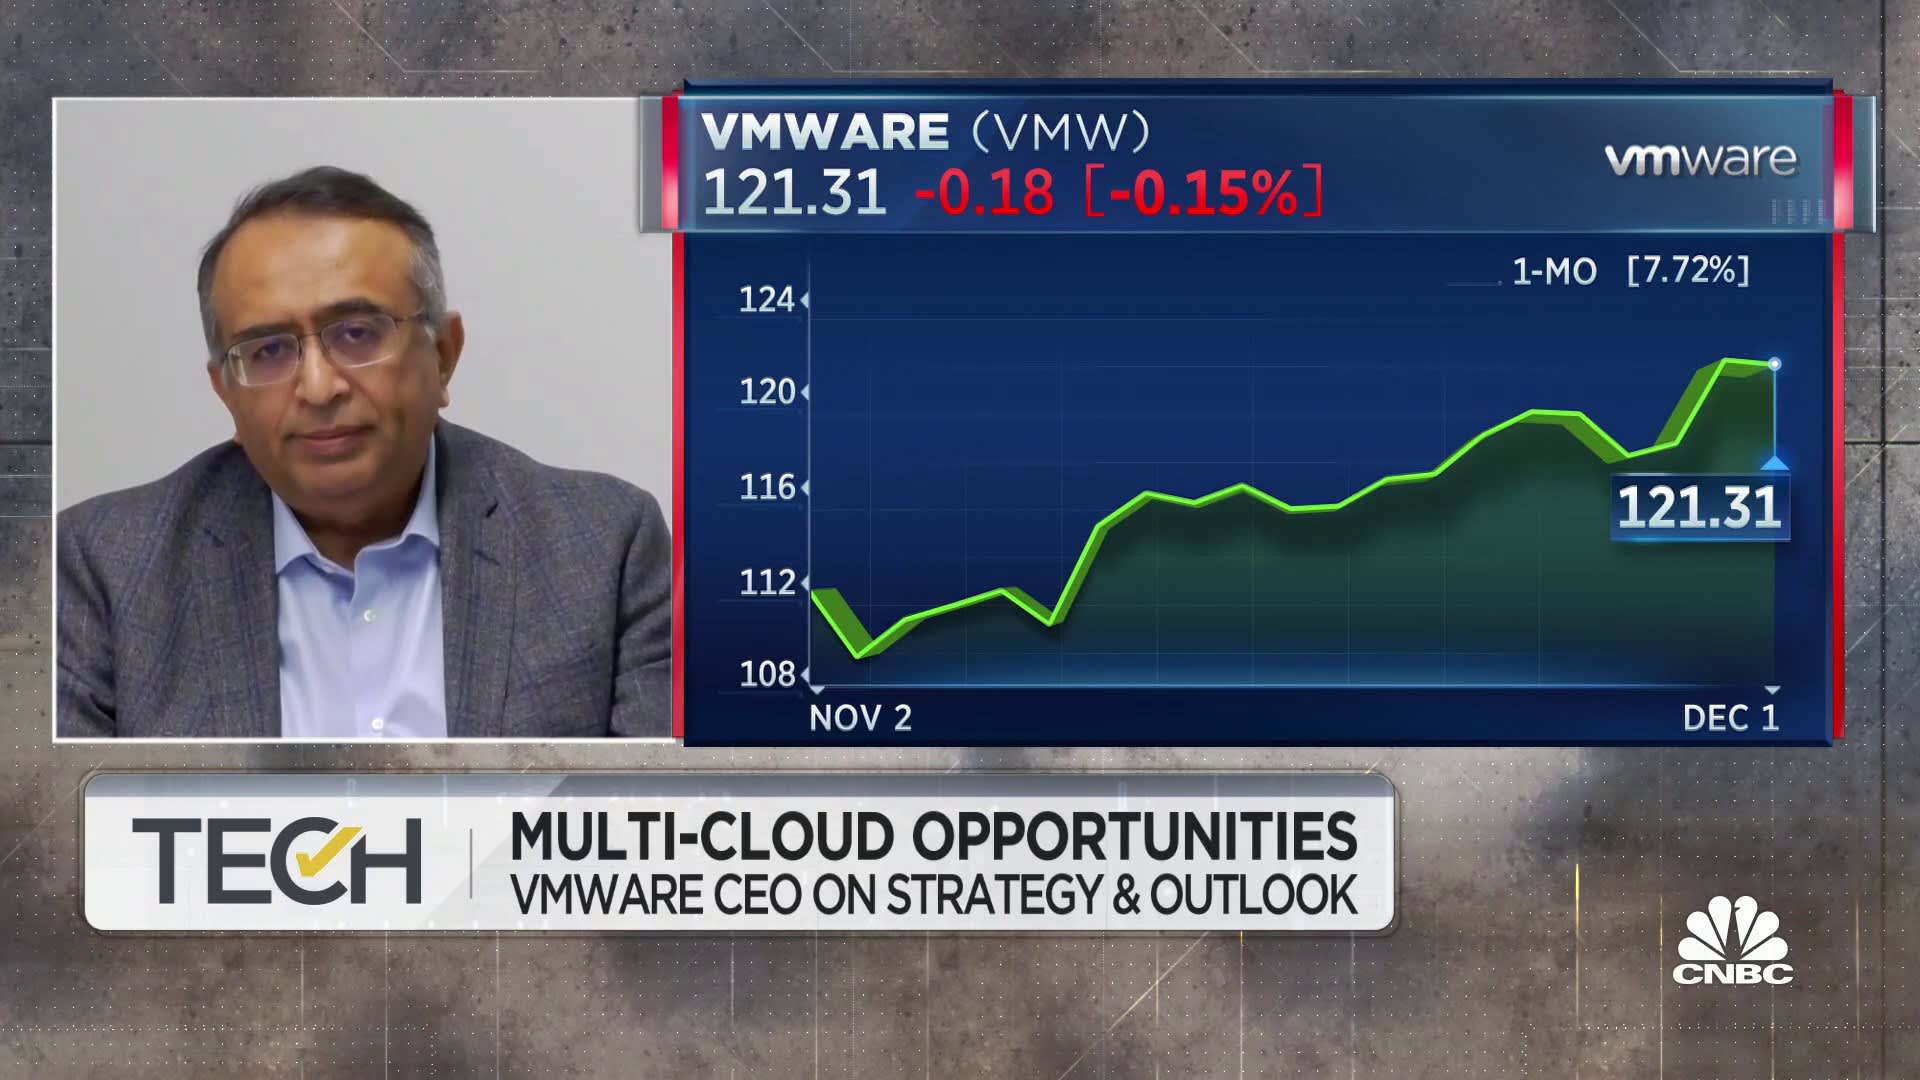 Roughly 75% of our customers use multi-cloud and data centers, says VMware CEO